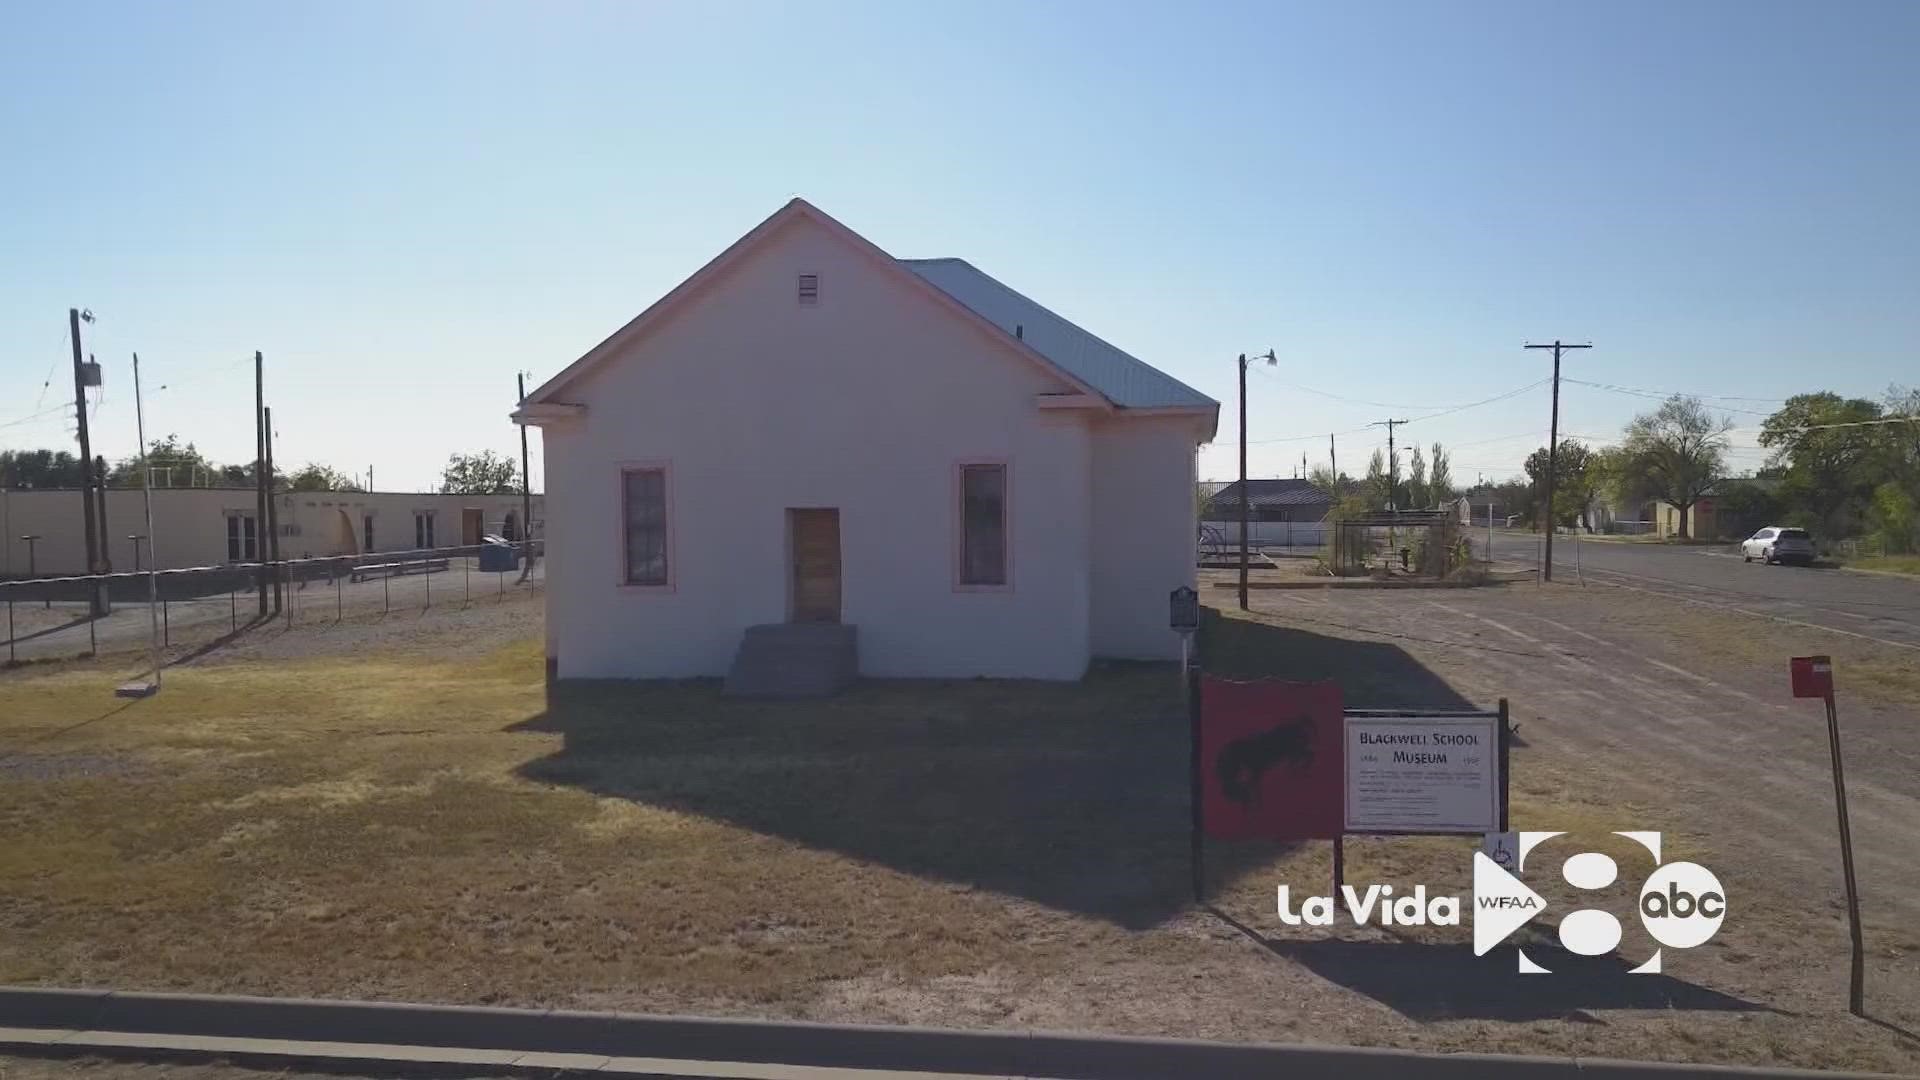 The Blackwell school in Marfa, Texas cleared one more hurdle on its way to be recognized as a national historic site.